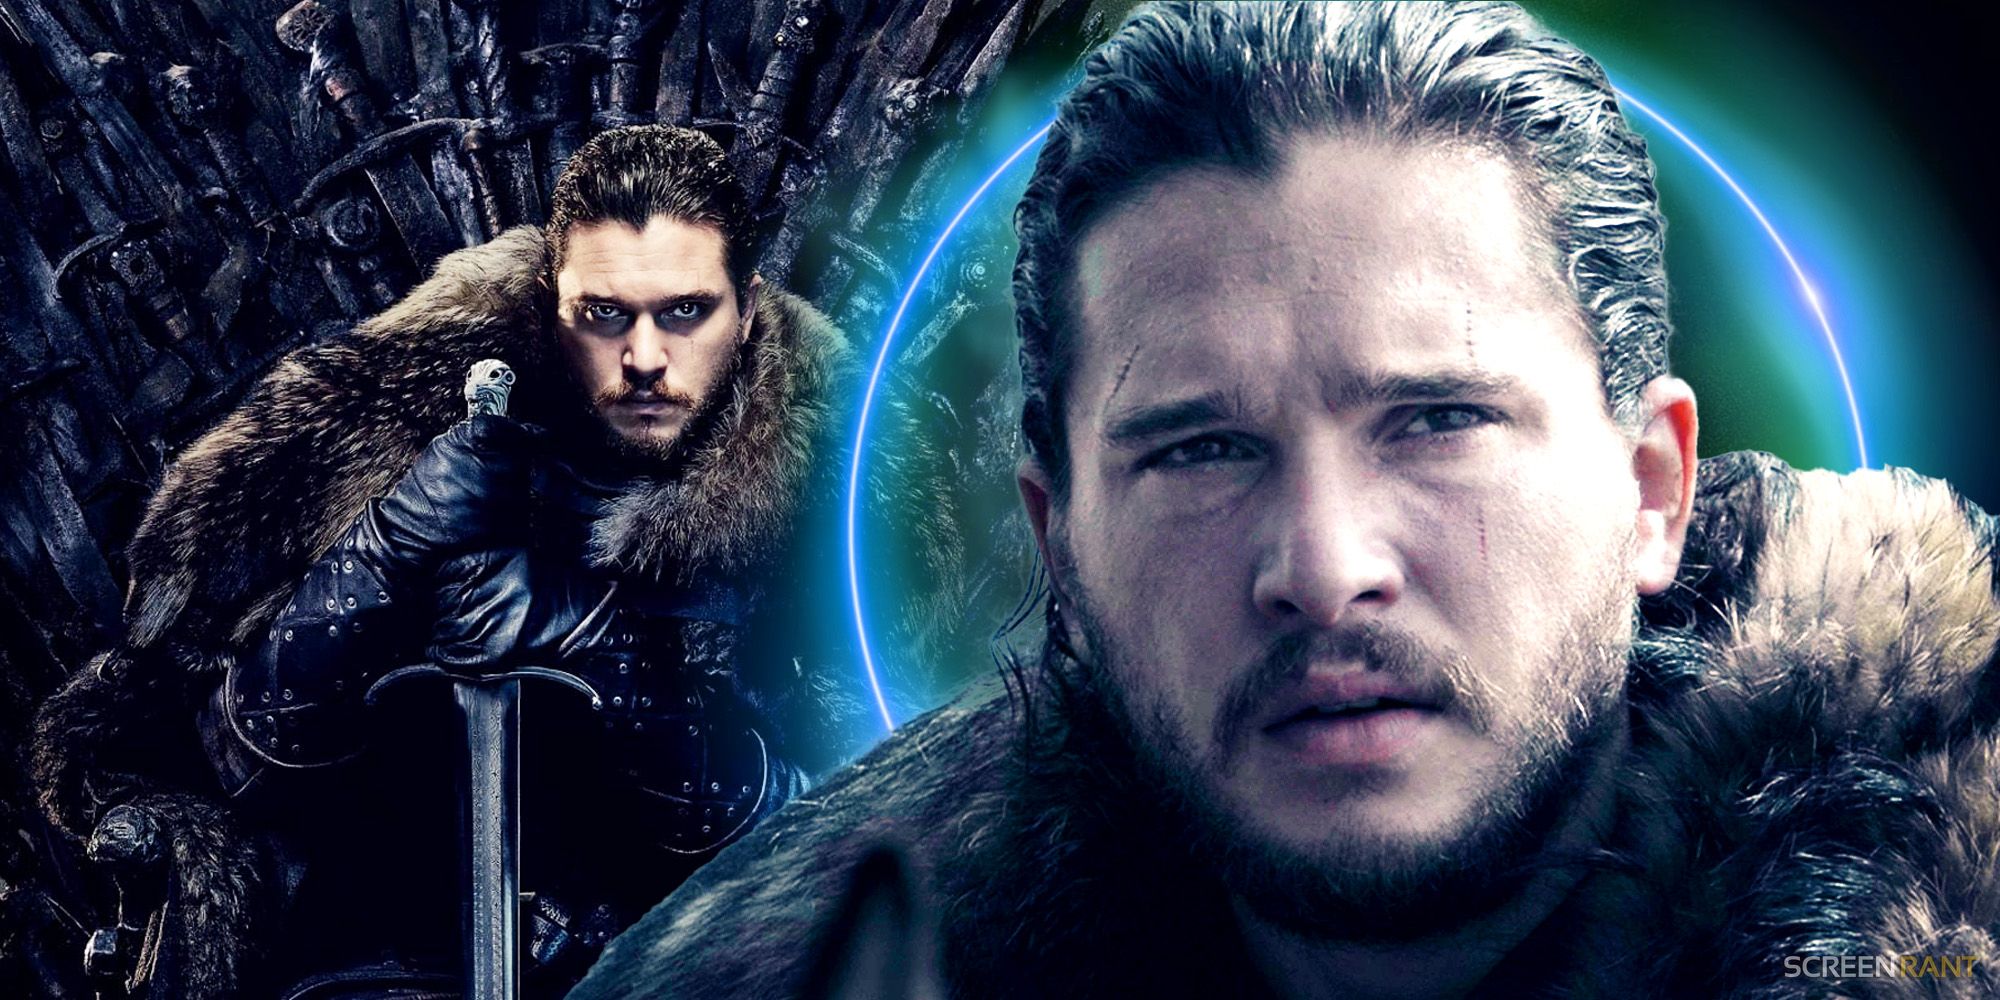 Kit Harington as Jon Snow in Game of Thrones, including sitting on the Iron Throne